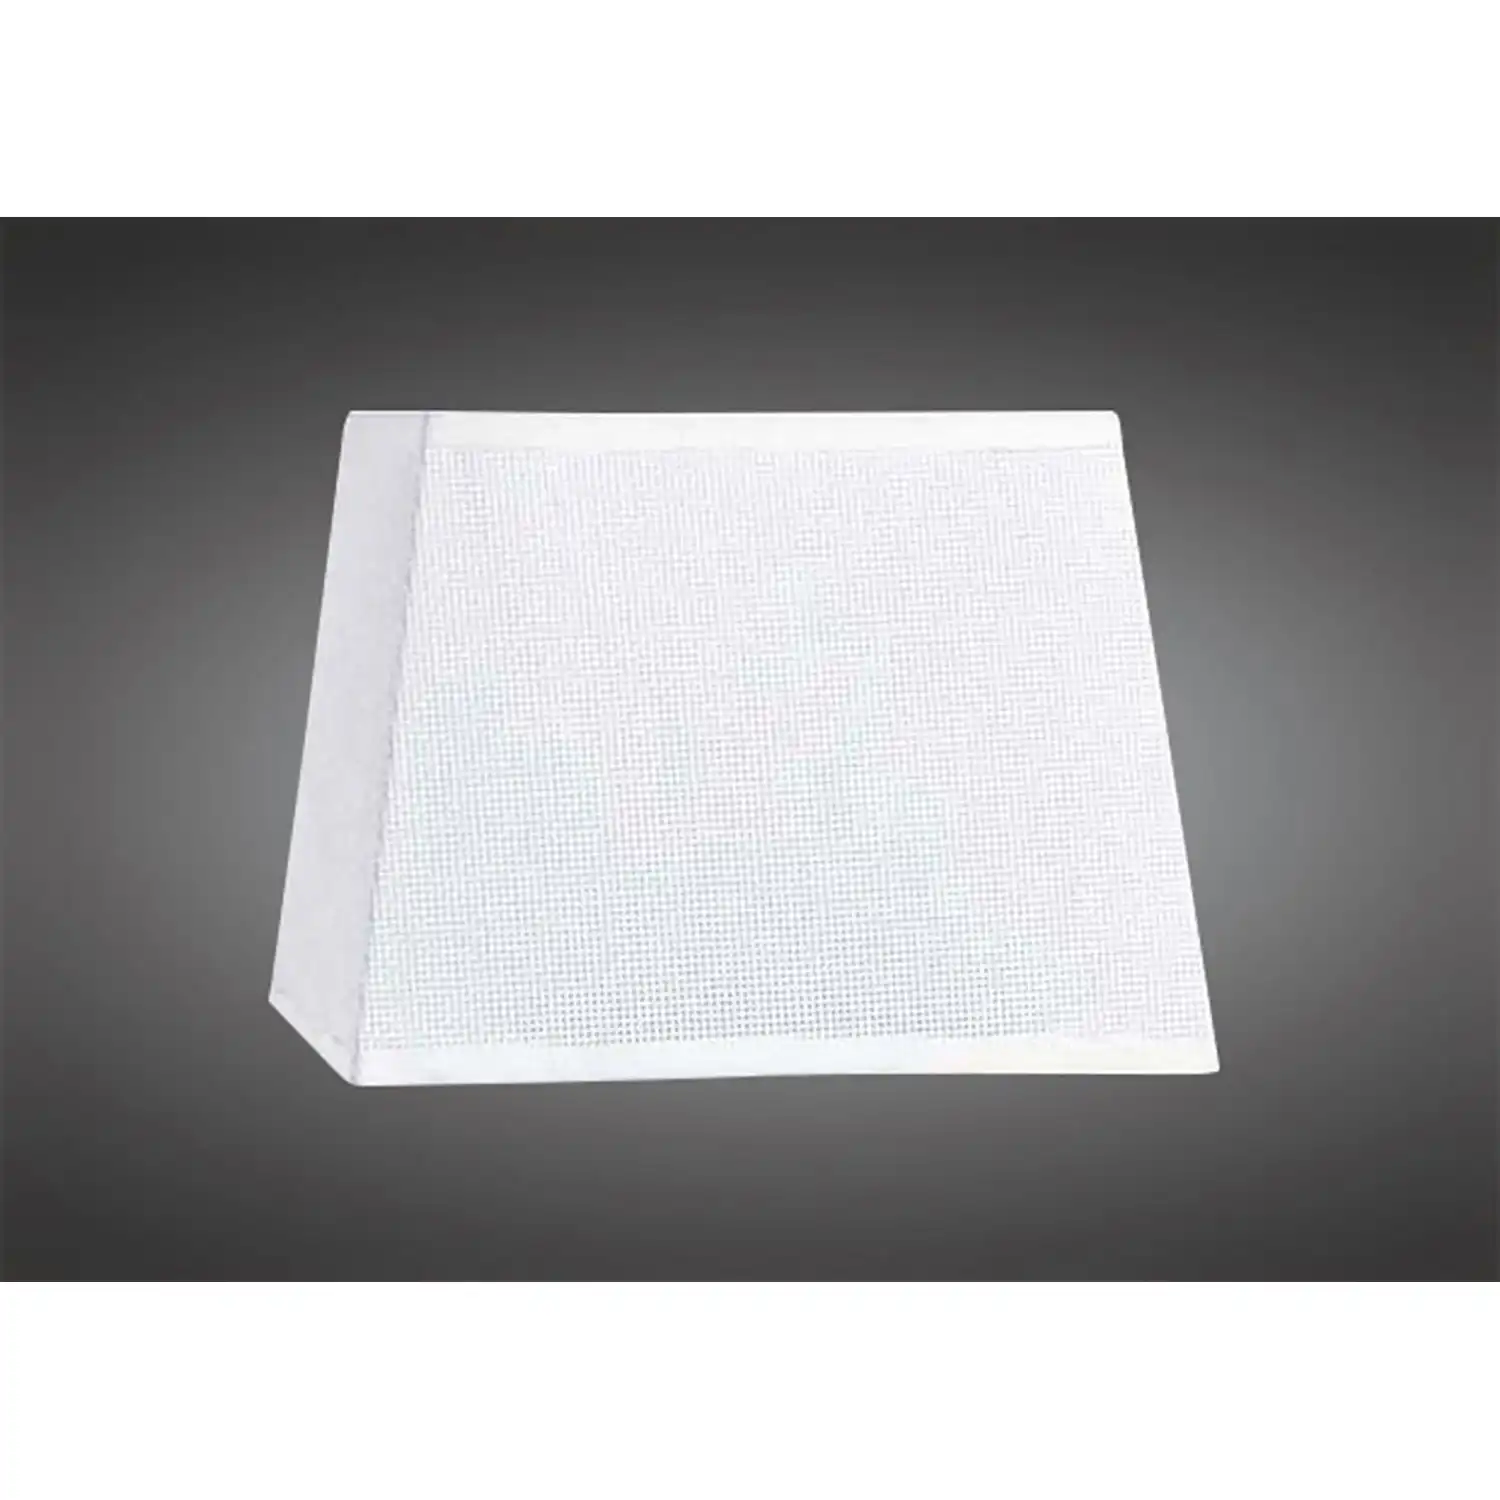 Habana White Square Shade 355 355x250mm, Suitable for Floor Lamps